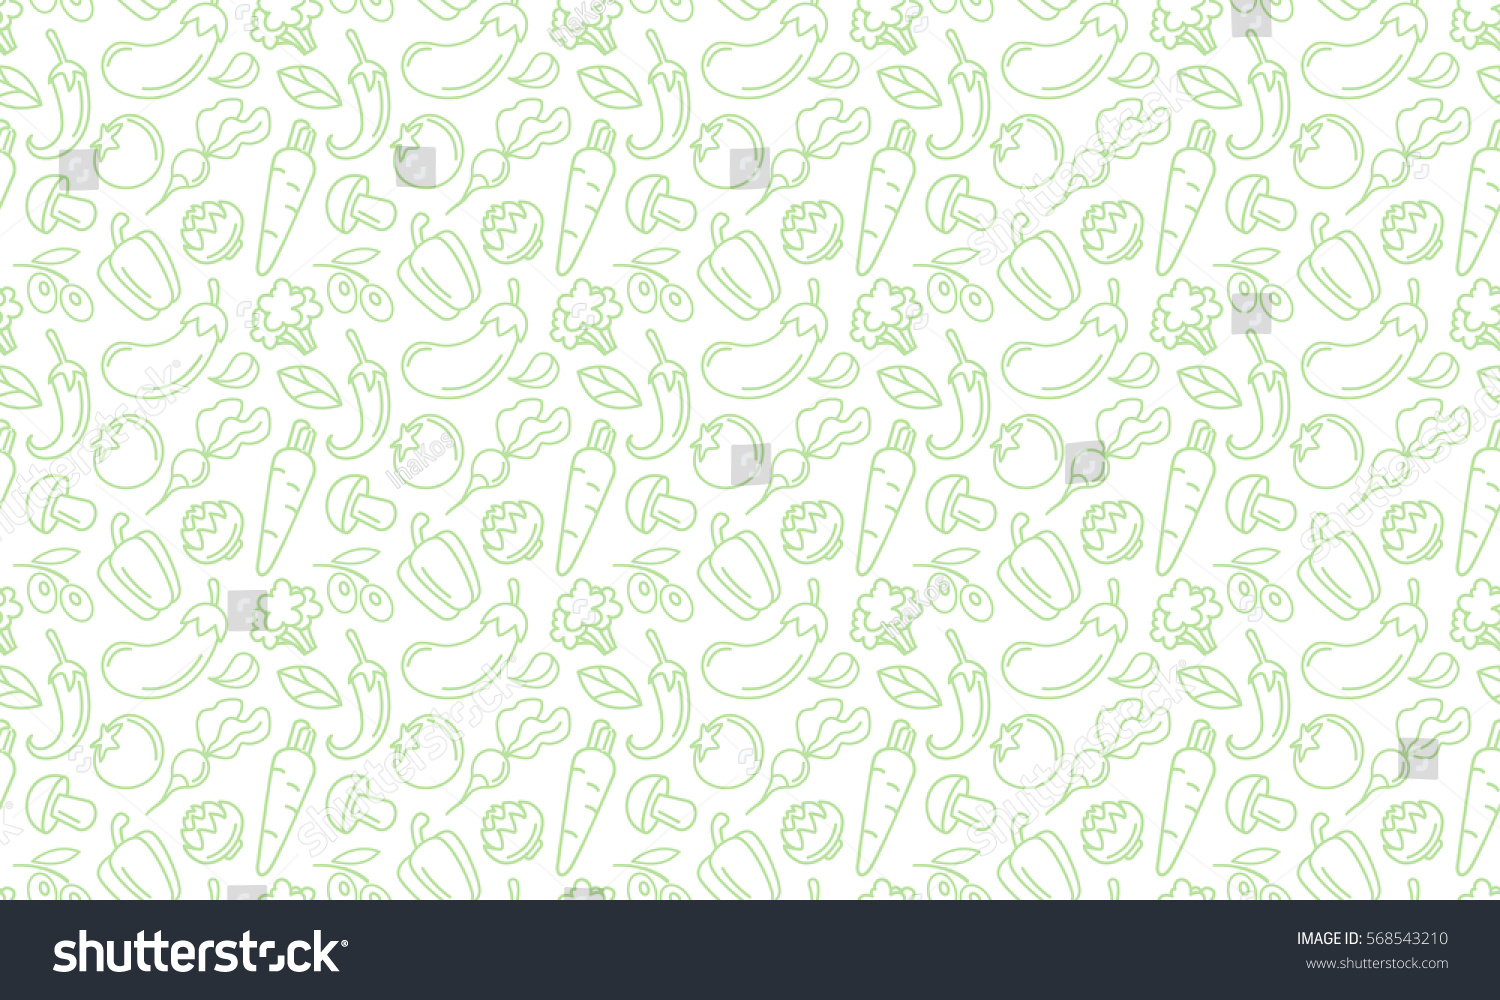 Vegetables and fruits Seamless hand drawn doodle pattern. Illustration for backgrounds, card, posters, banners, textile prints, cover, web design. Eat healthy. Vector icons. #568543210